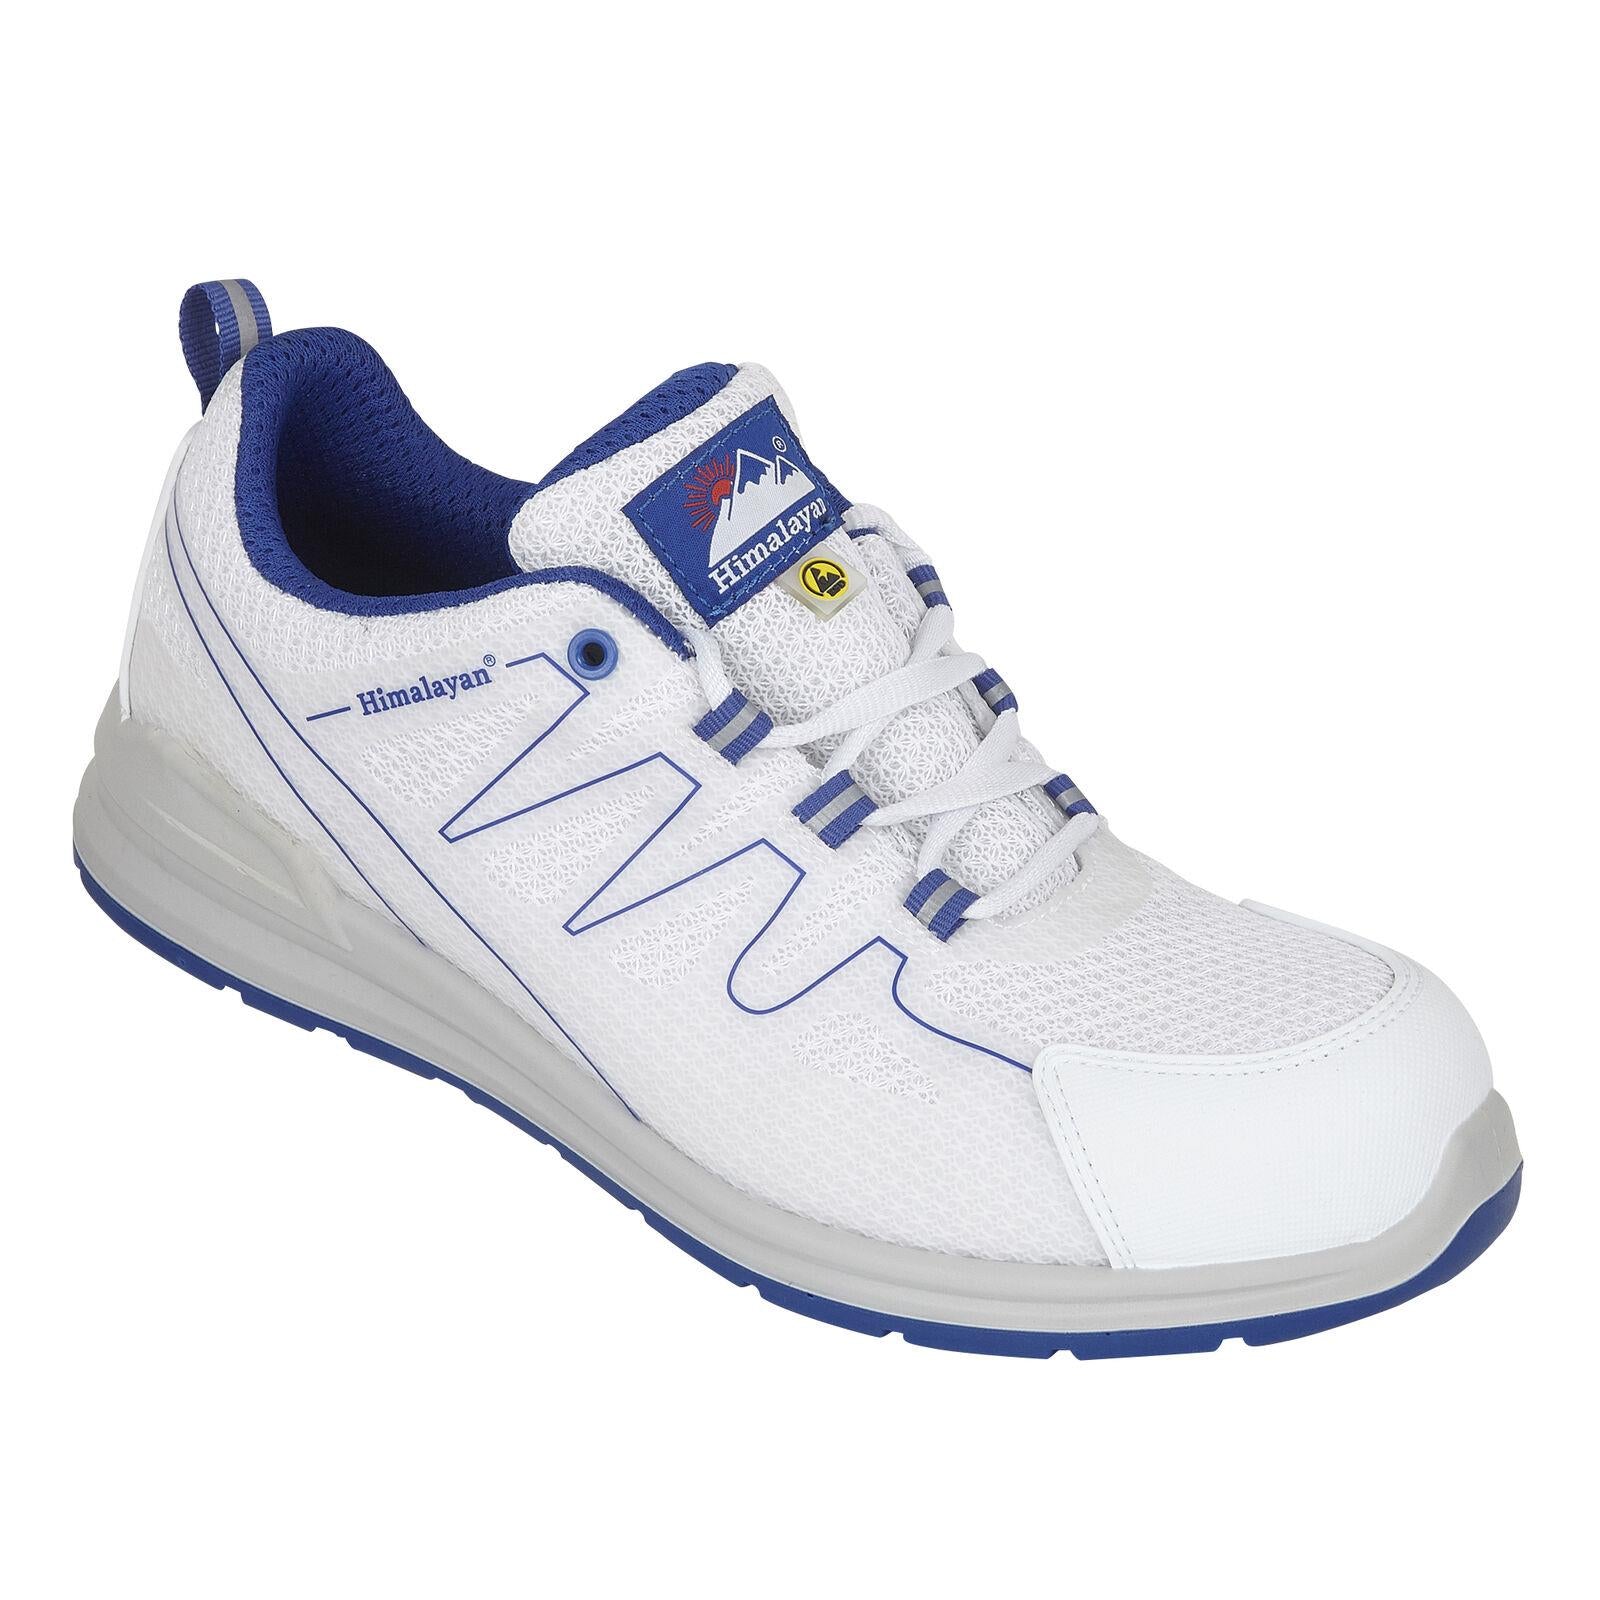 Himalayan 4330 #Electro S1P ESD white composite toe/midsole safety trainer shoe